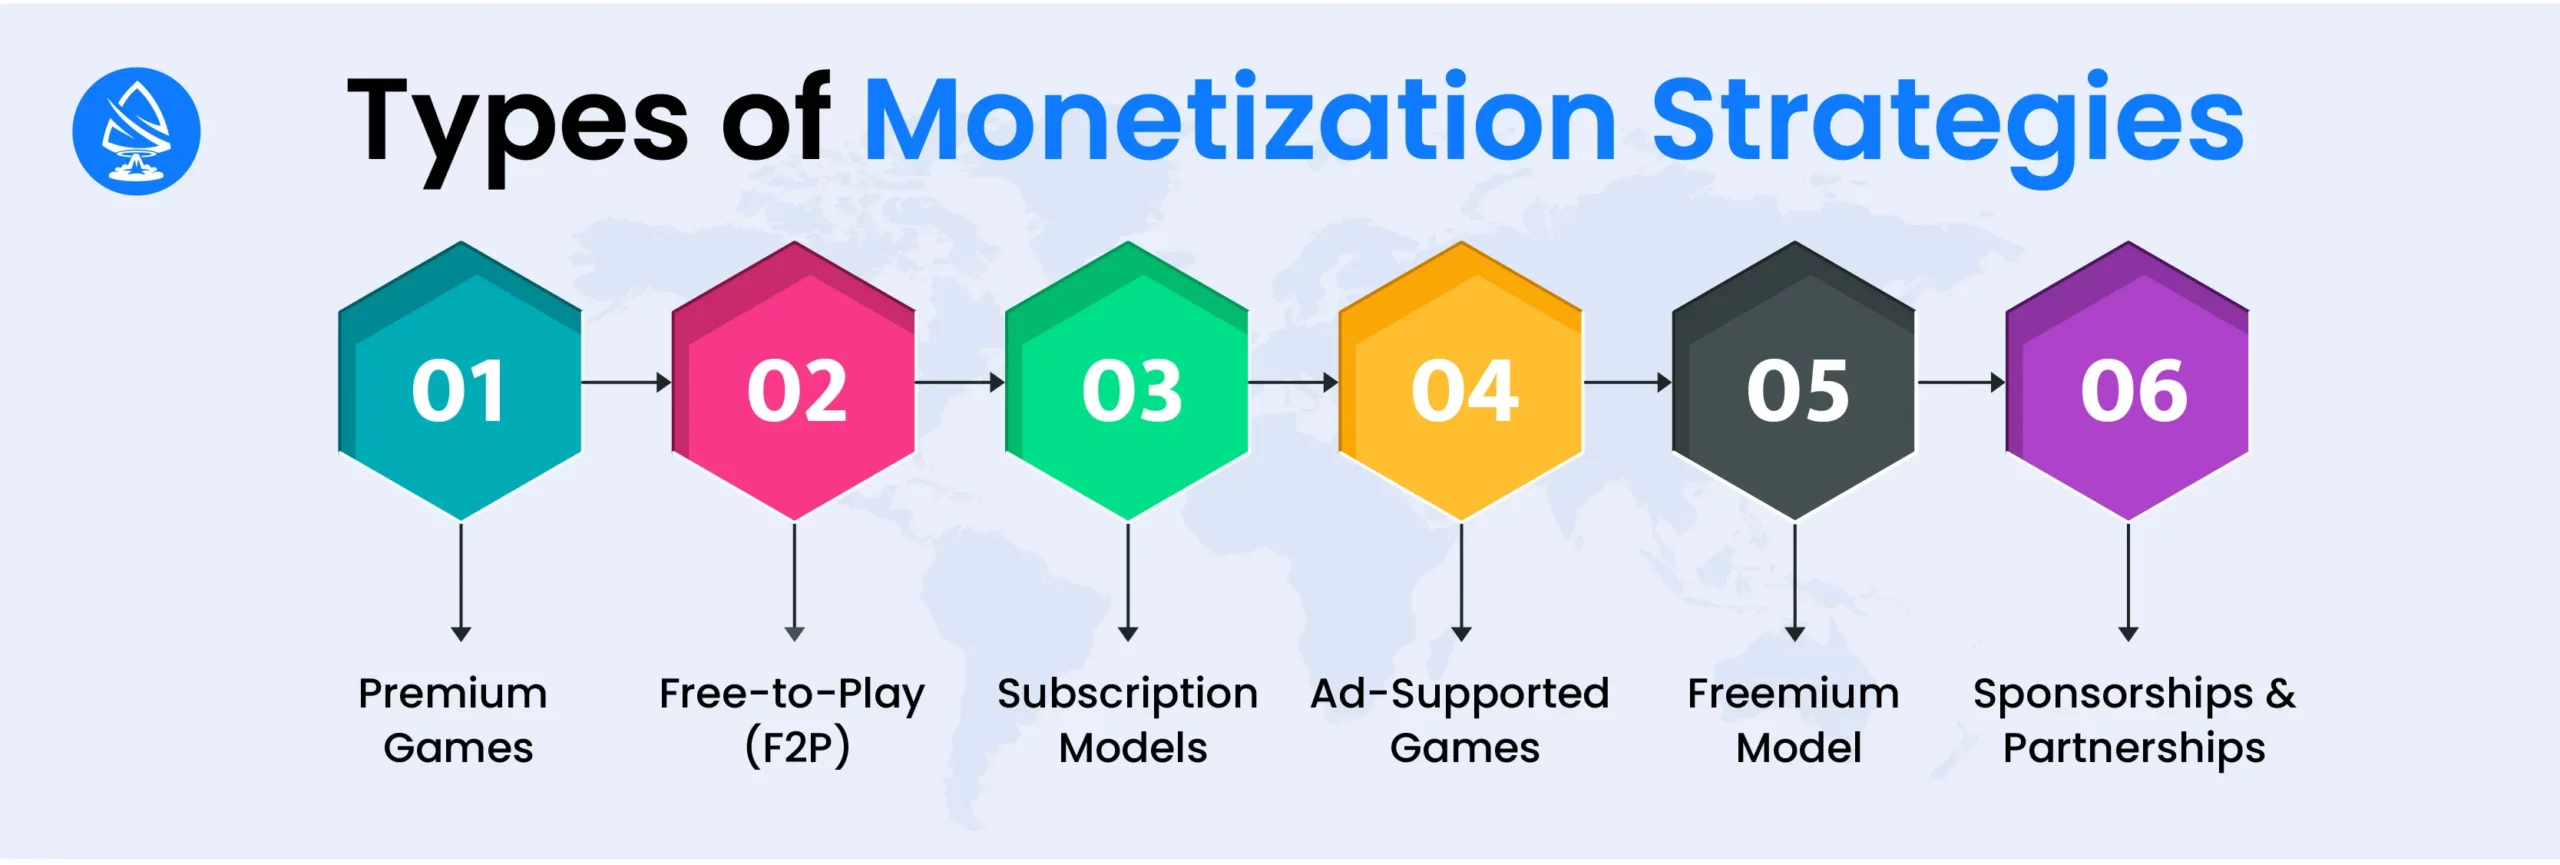 Types of Mobile Game Monetization Strategies